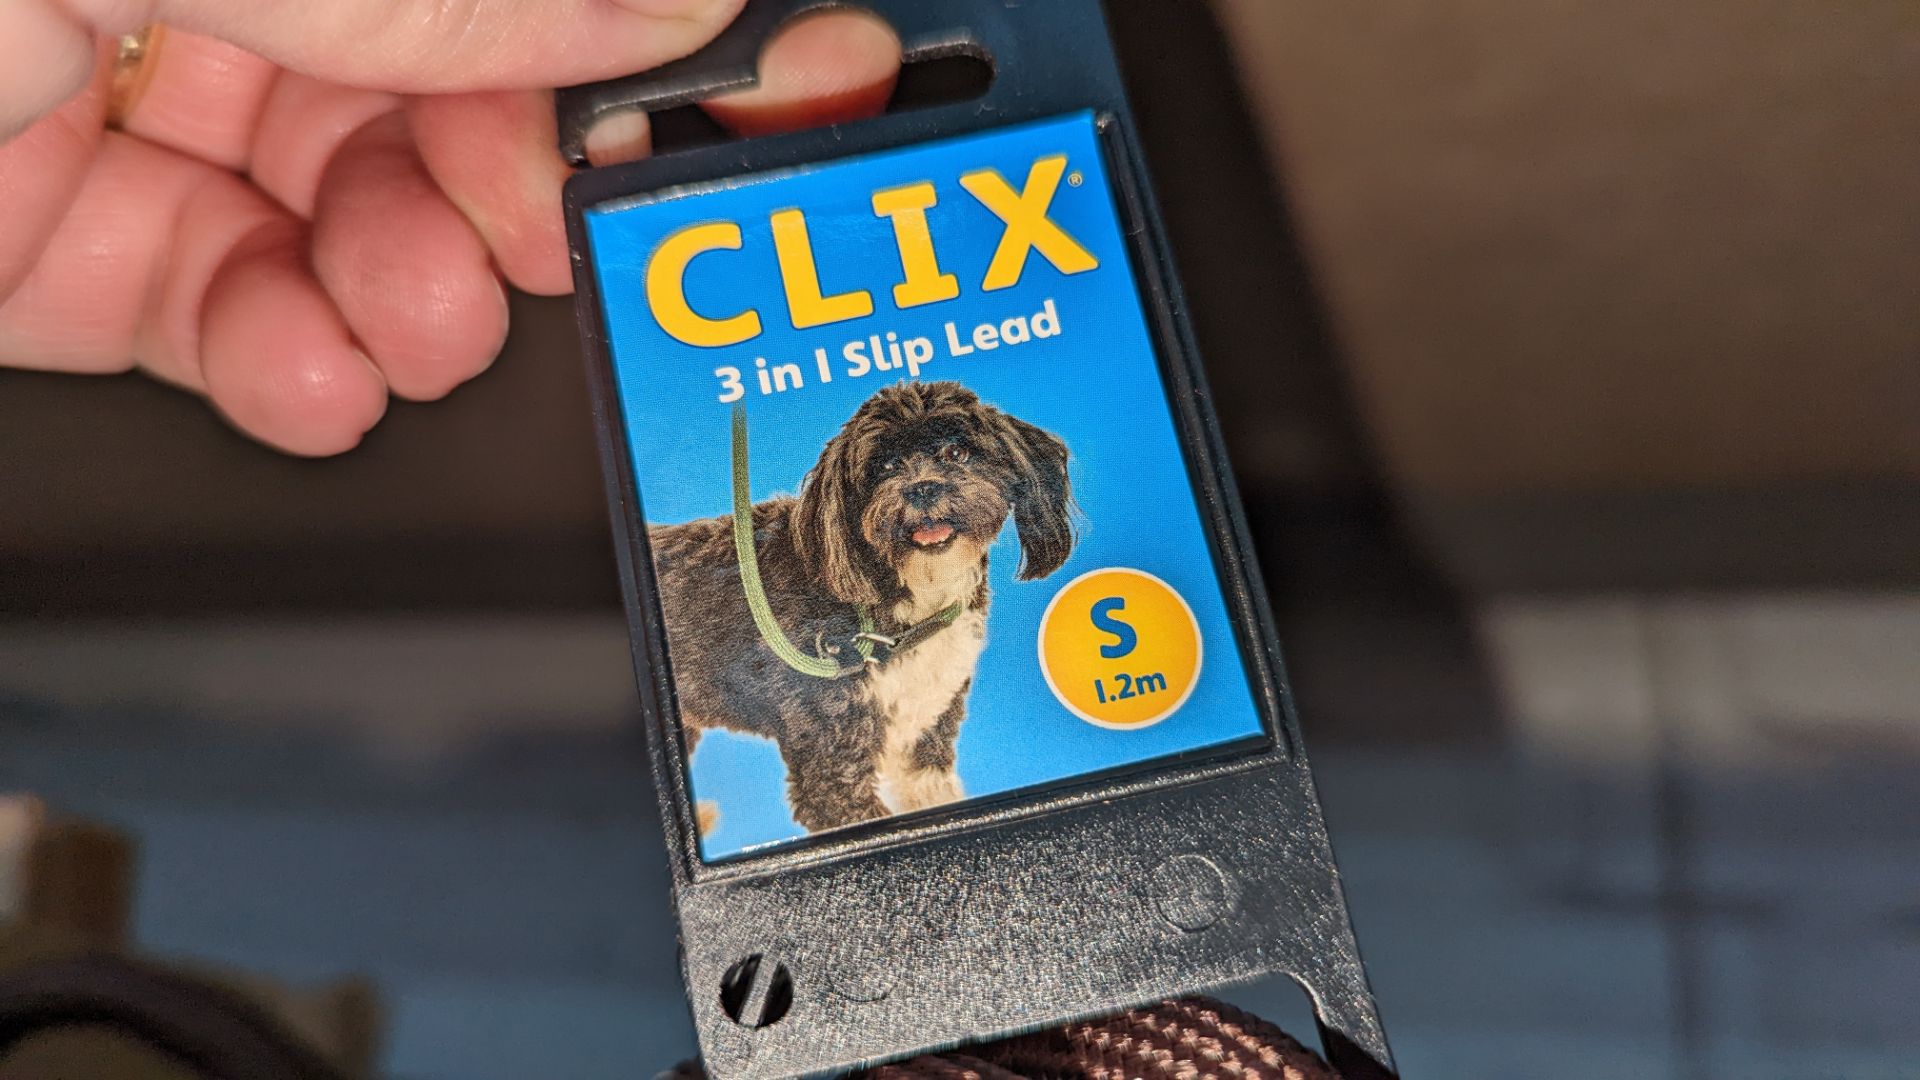 48 off Clix Premium 3-in-1 brown slip dog leads - this lot comprises 4 boxes each containing 12 lead - Image 4 of 4